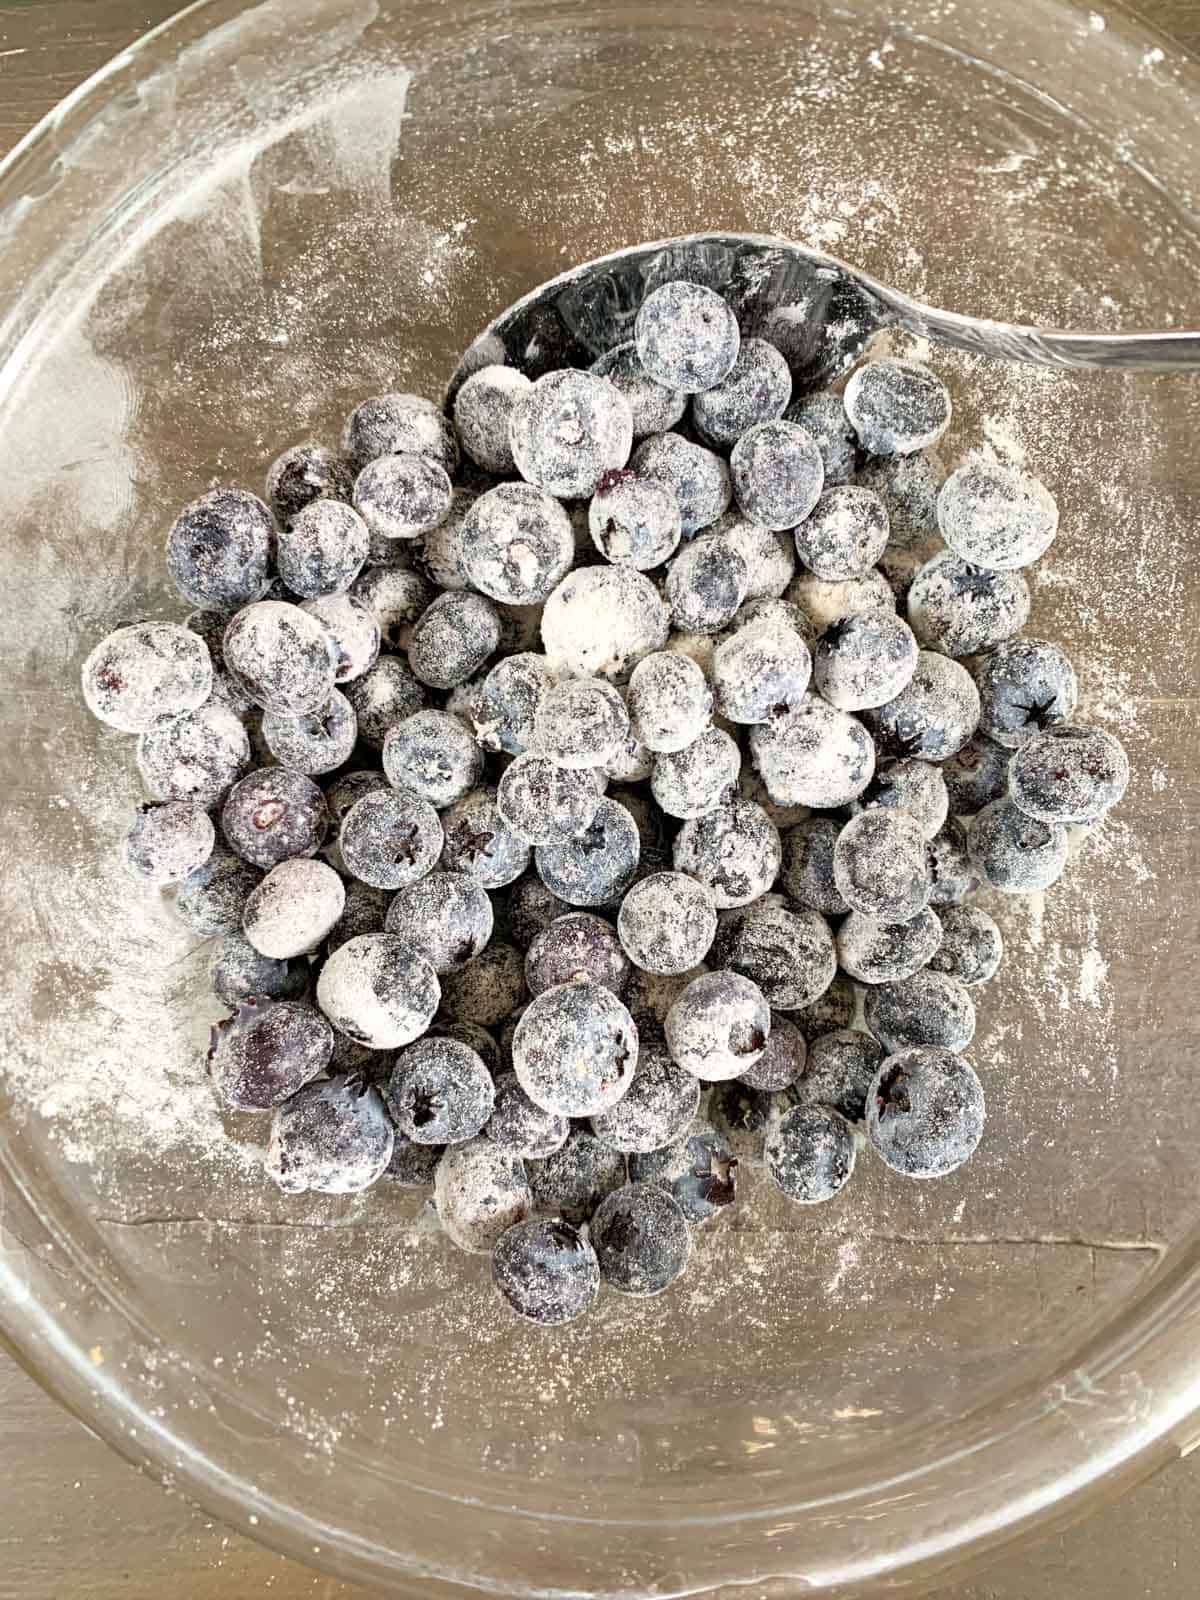 coat the blueberries with all purpose flour.